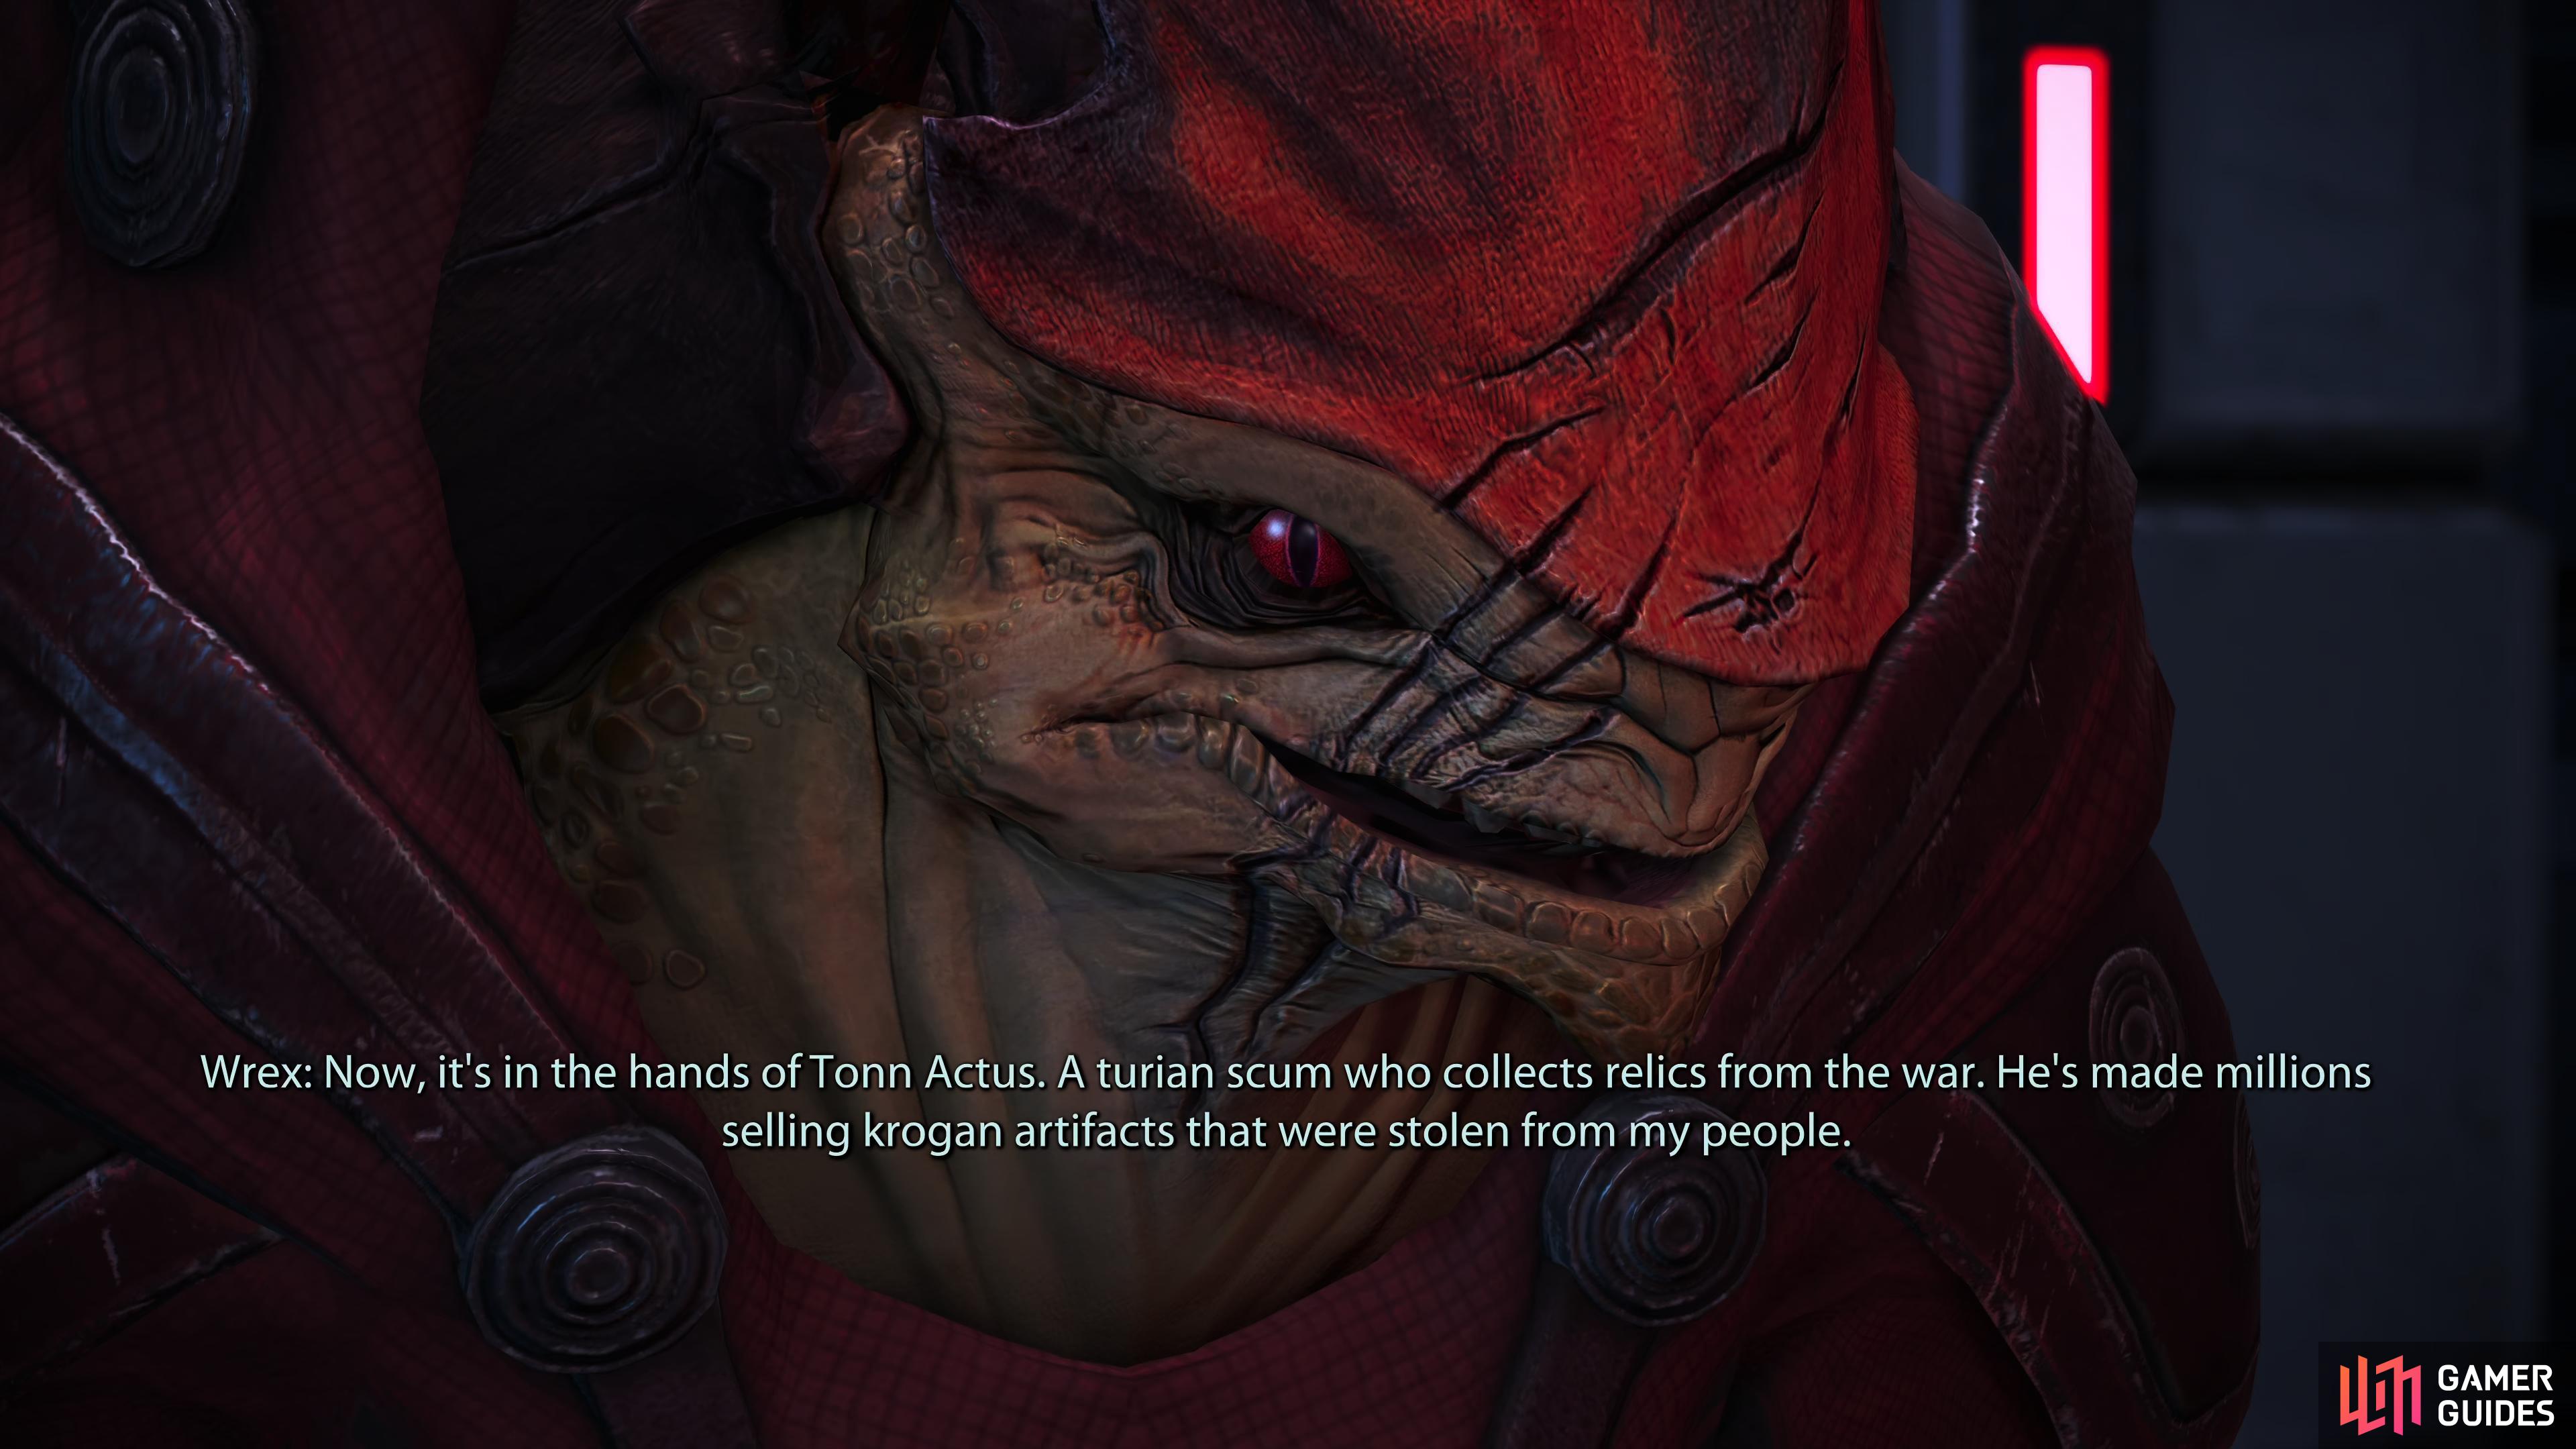 Speak to Wrex on the Normandy to learn about this Assignment